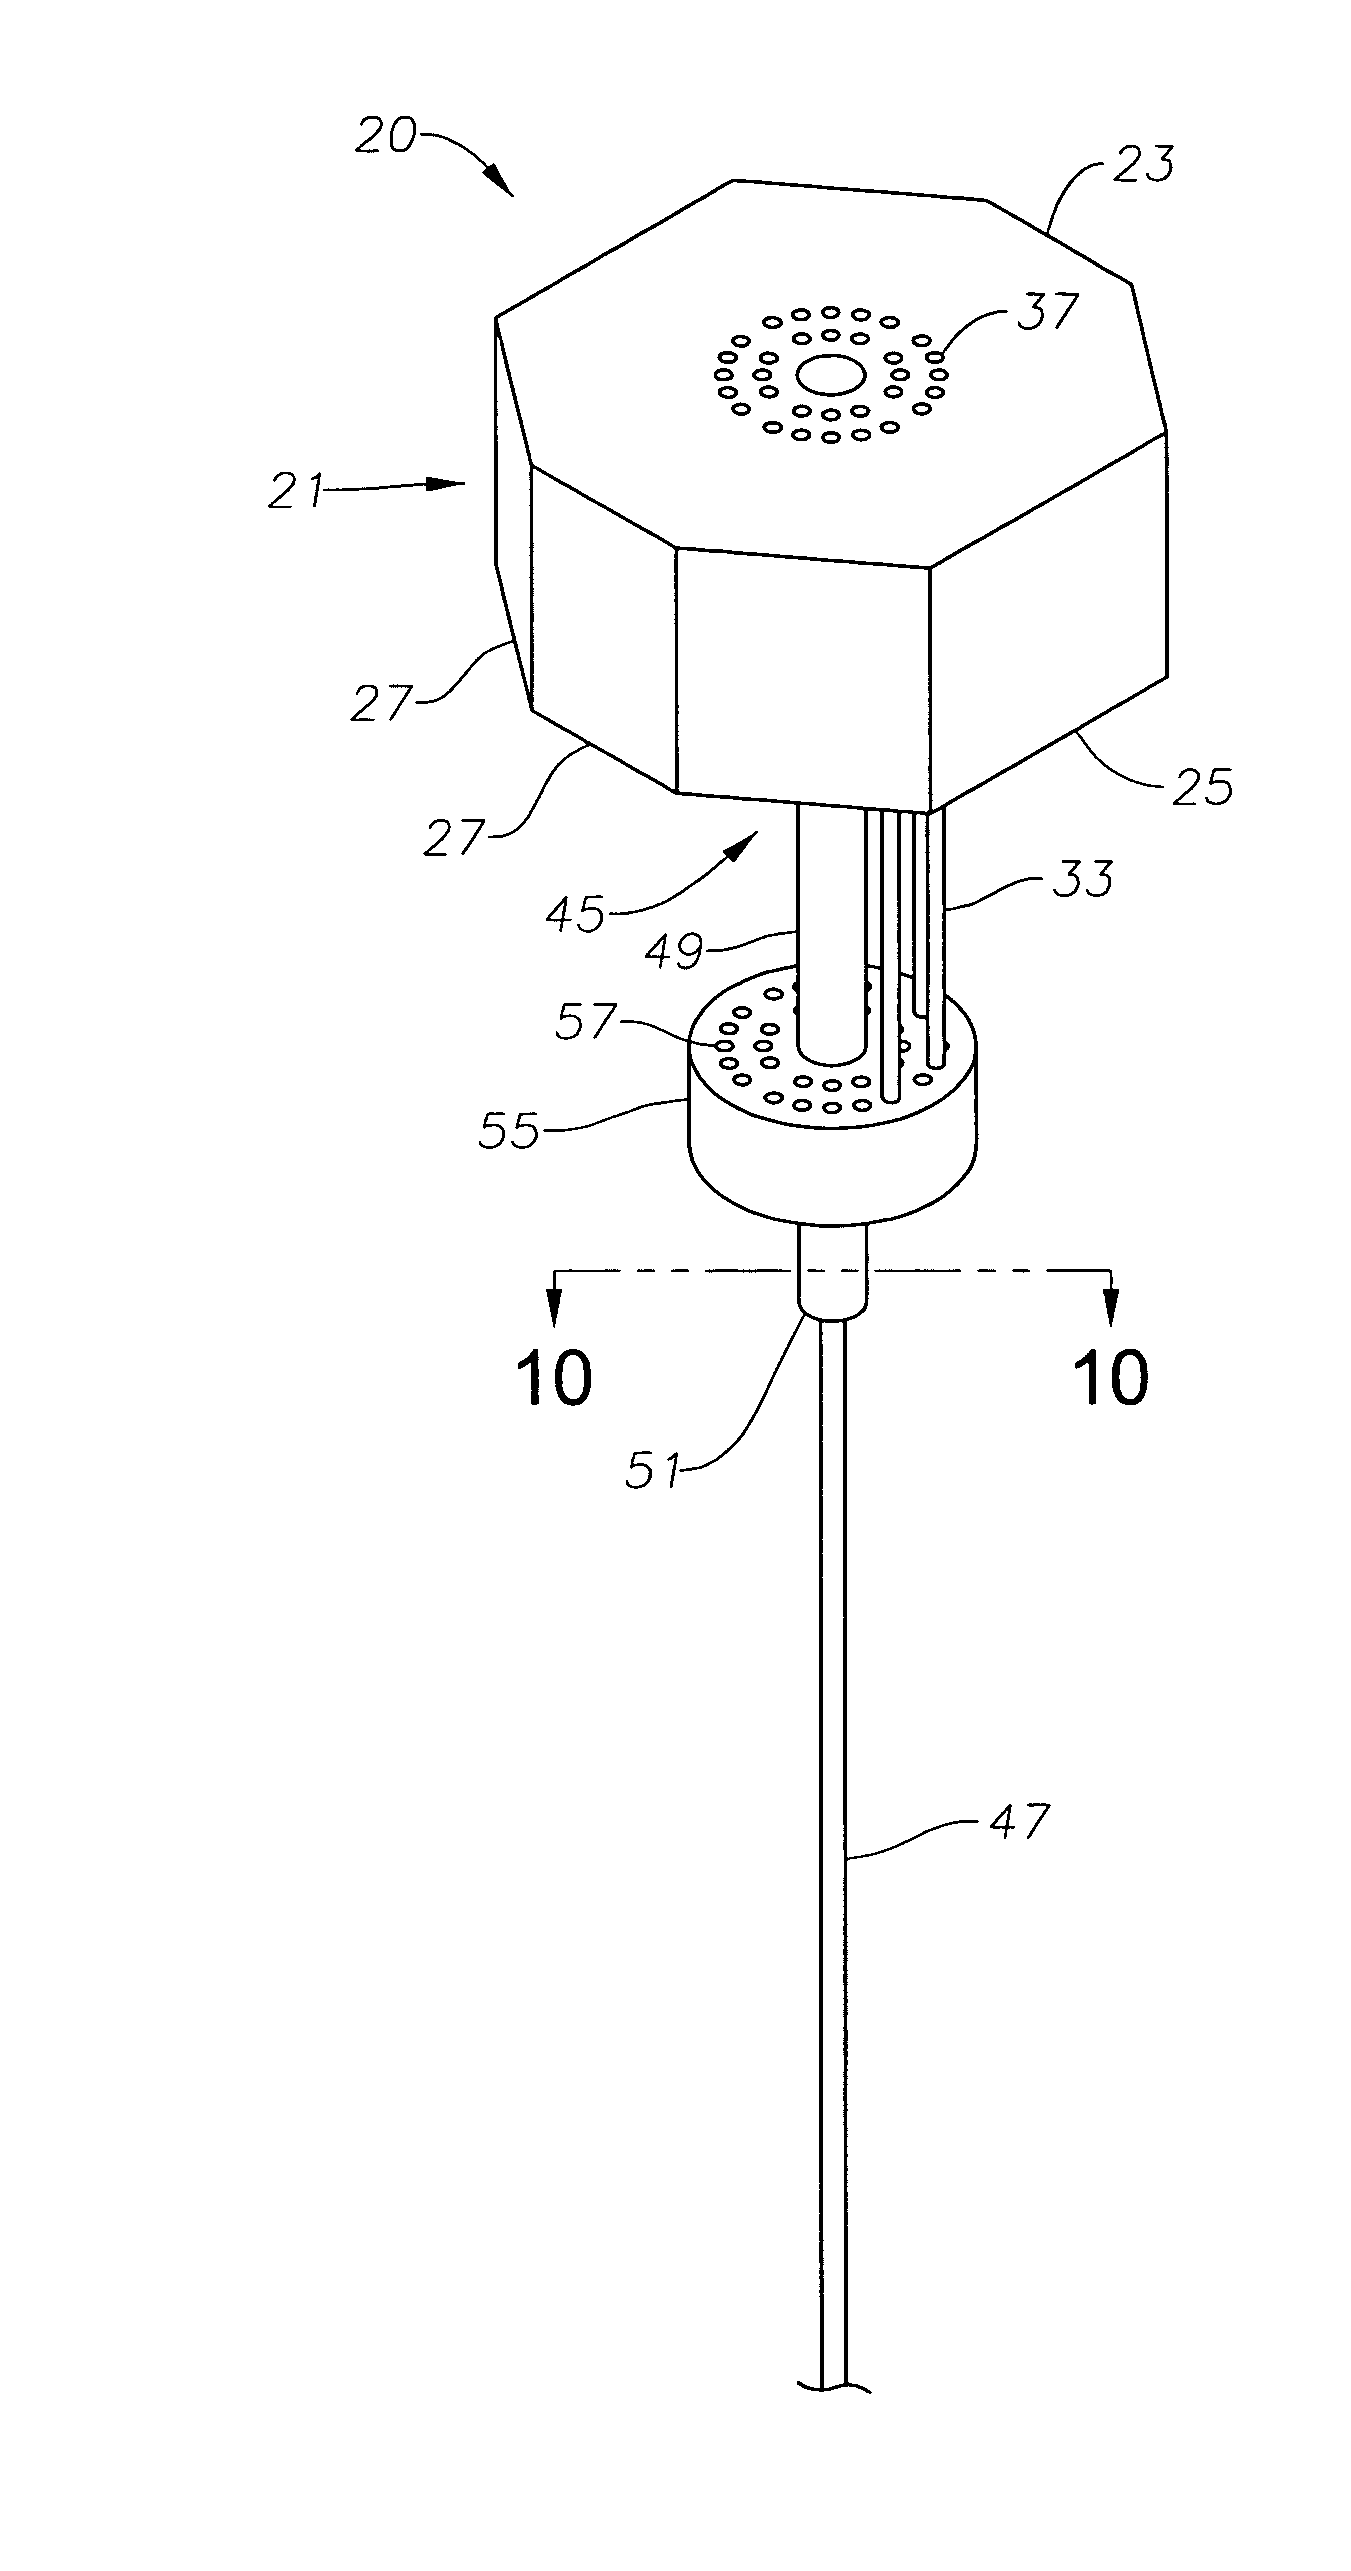 Apparatus and method of constructing offshore platforms